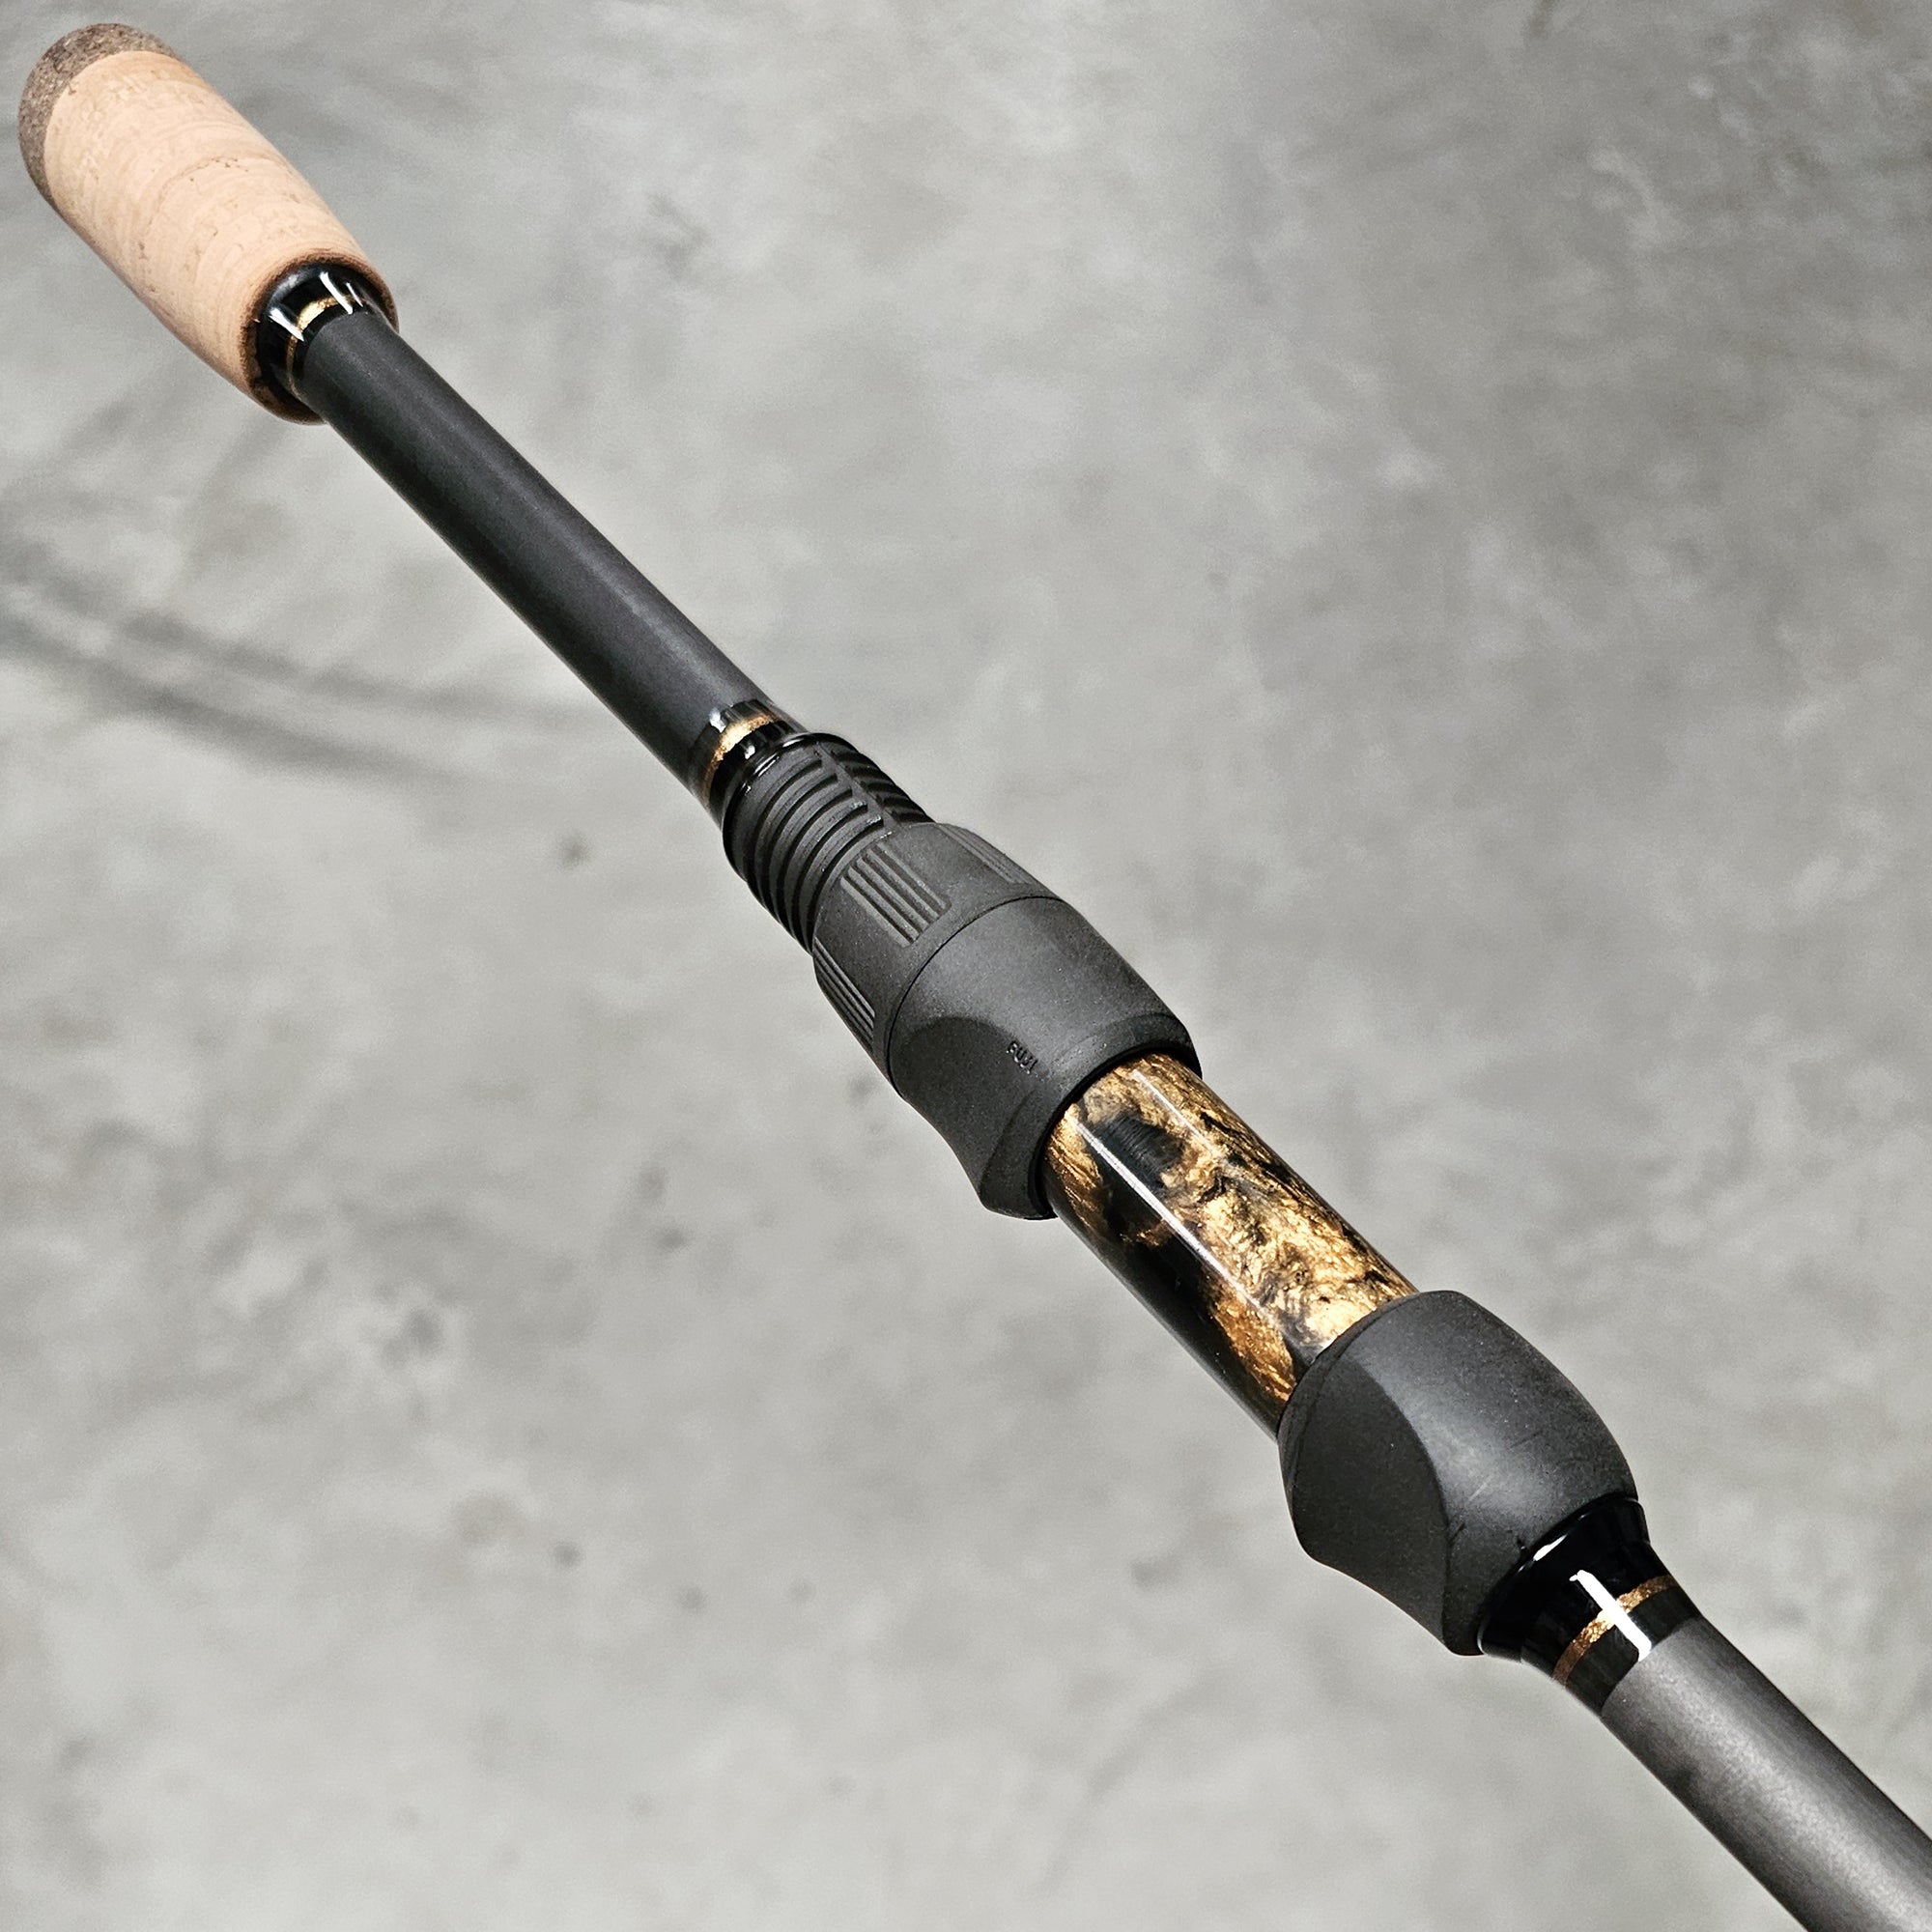 Custom Spinning Rods - All American Pro Series 1PC Heavy Composite Power  AAPS70014